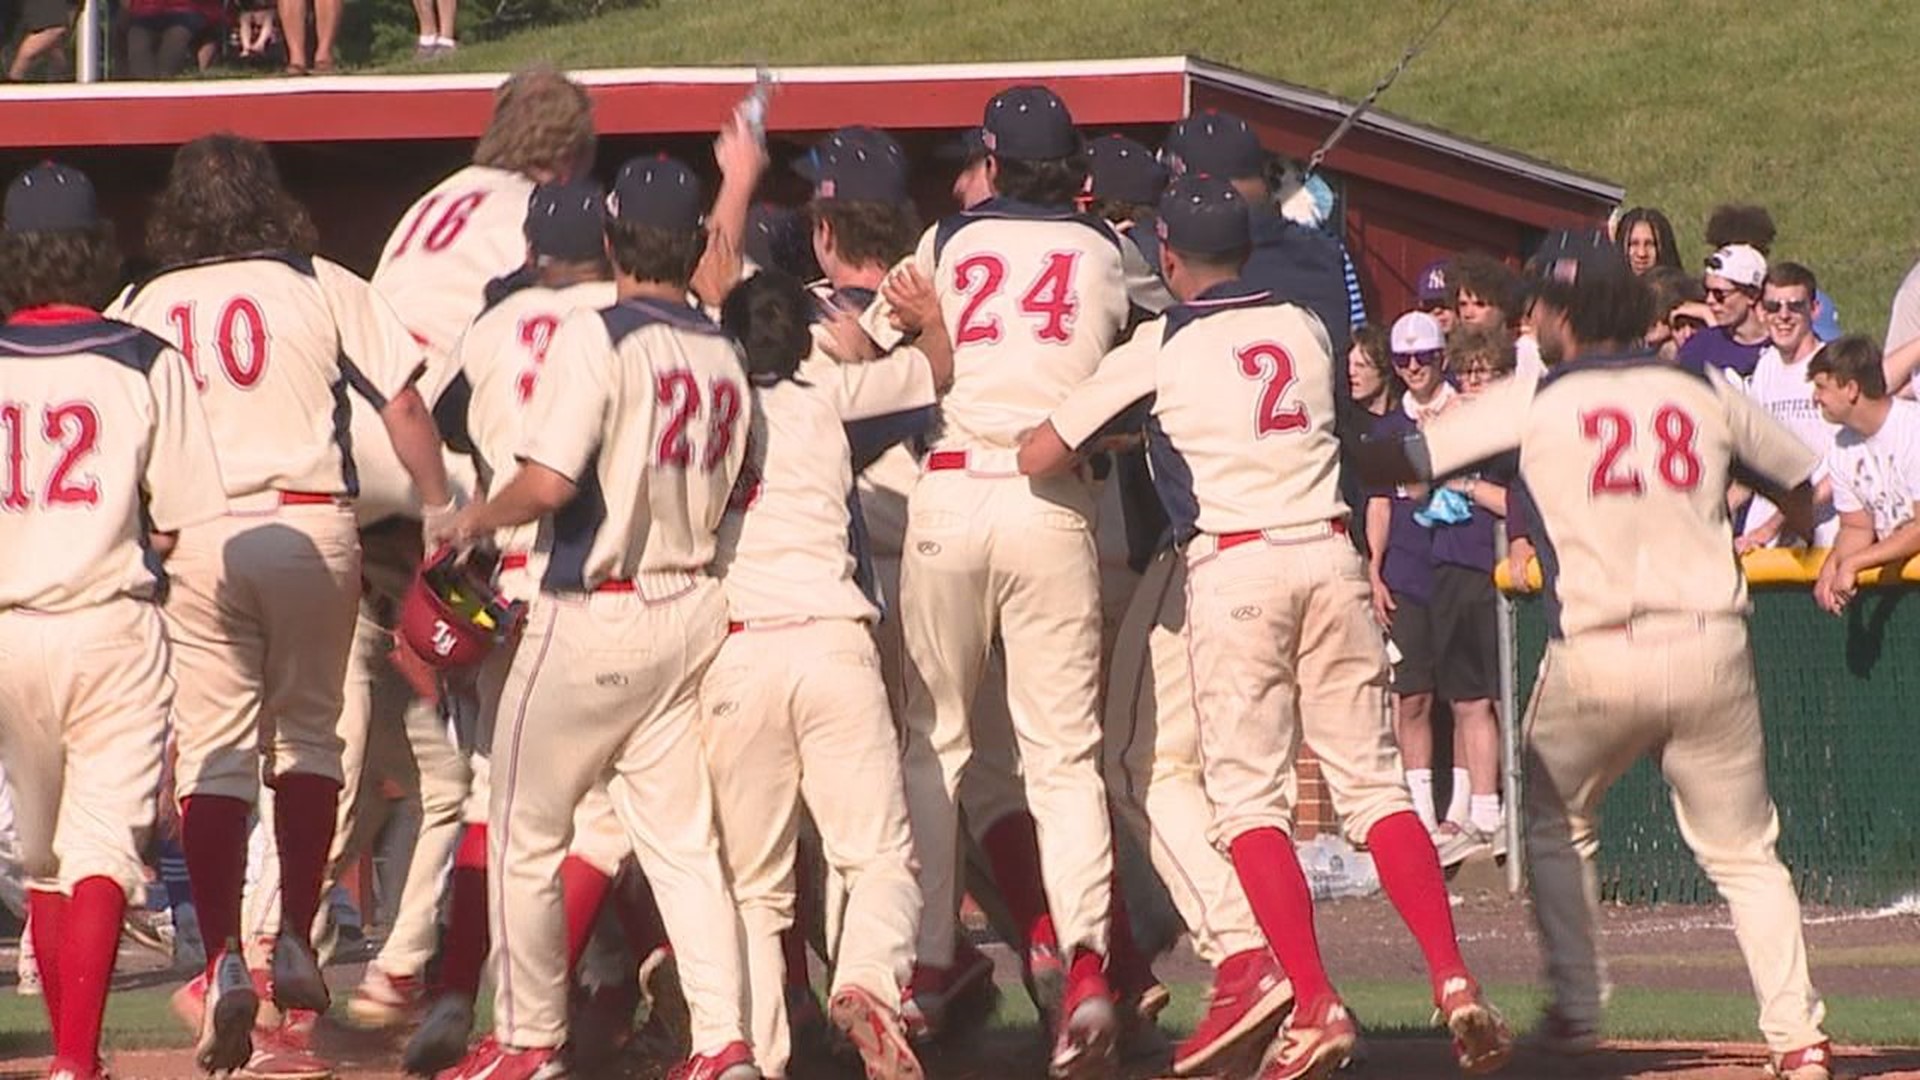 Cole Wagner's seventh-inning home run lifts the Patriots to their first district championship since 1990.